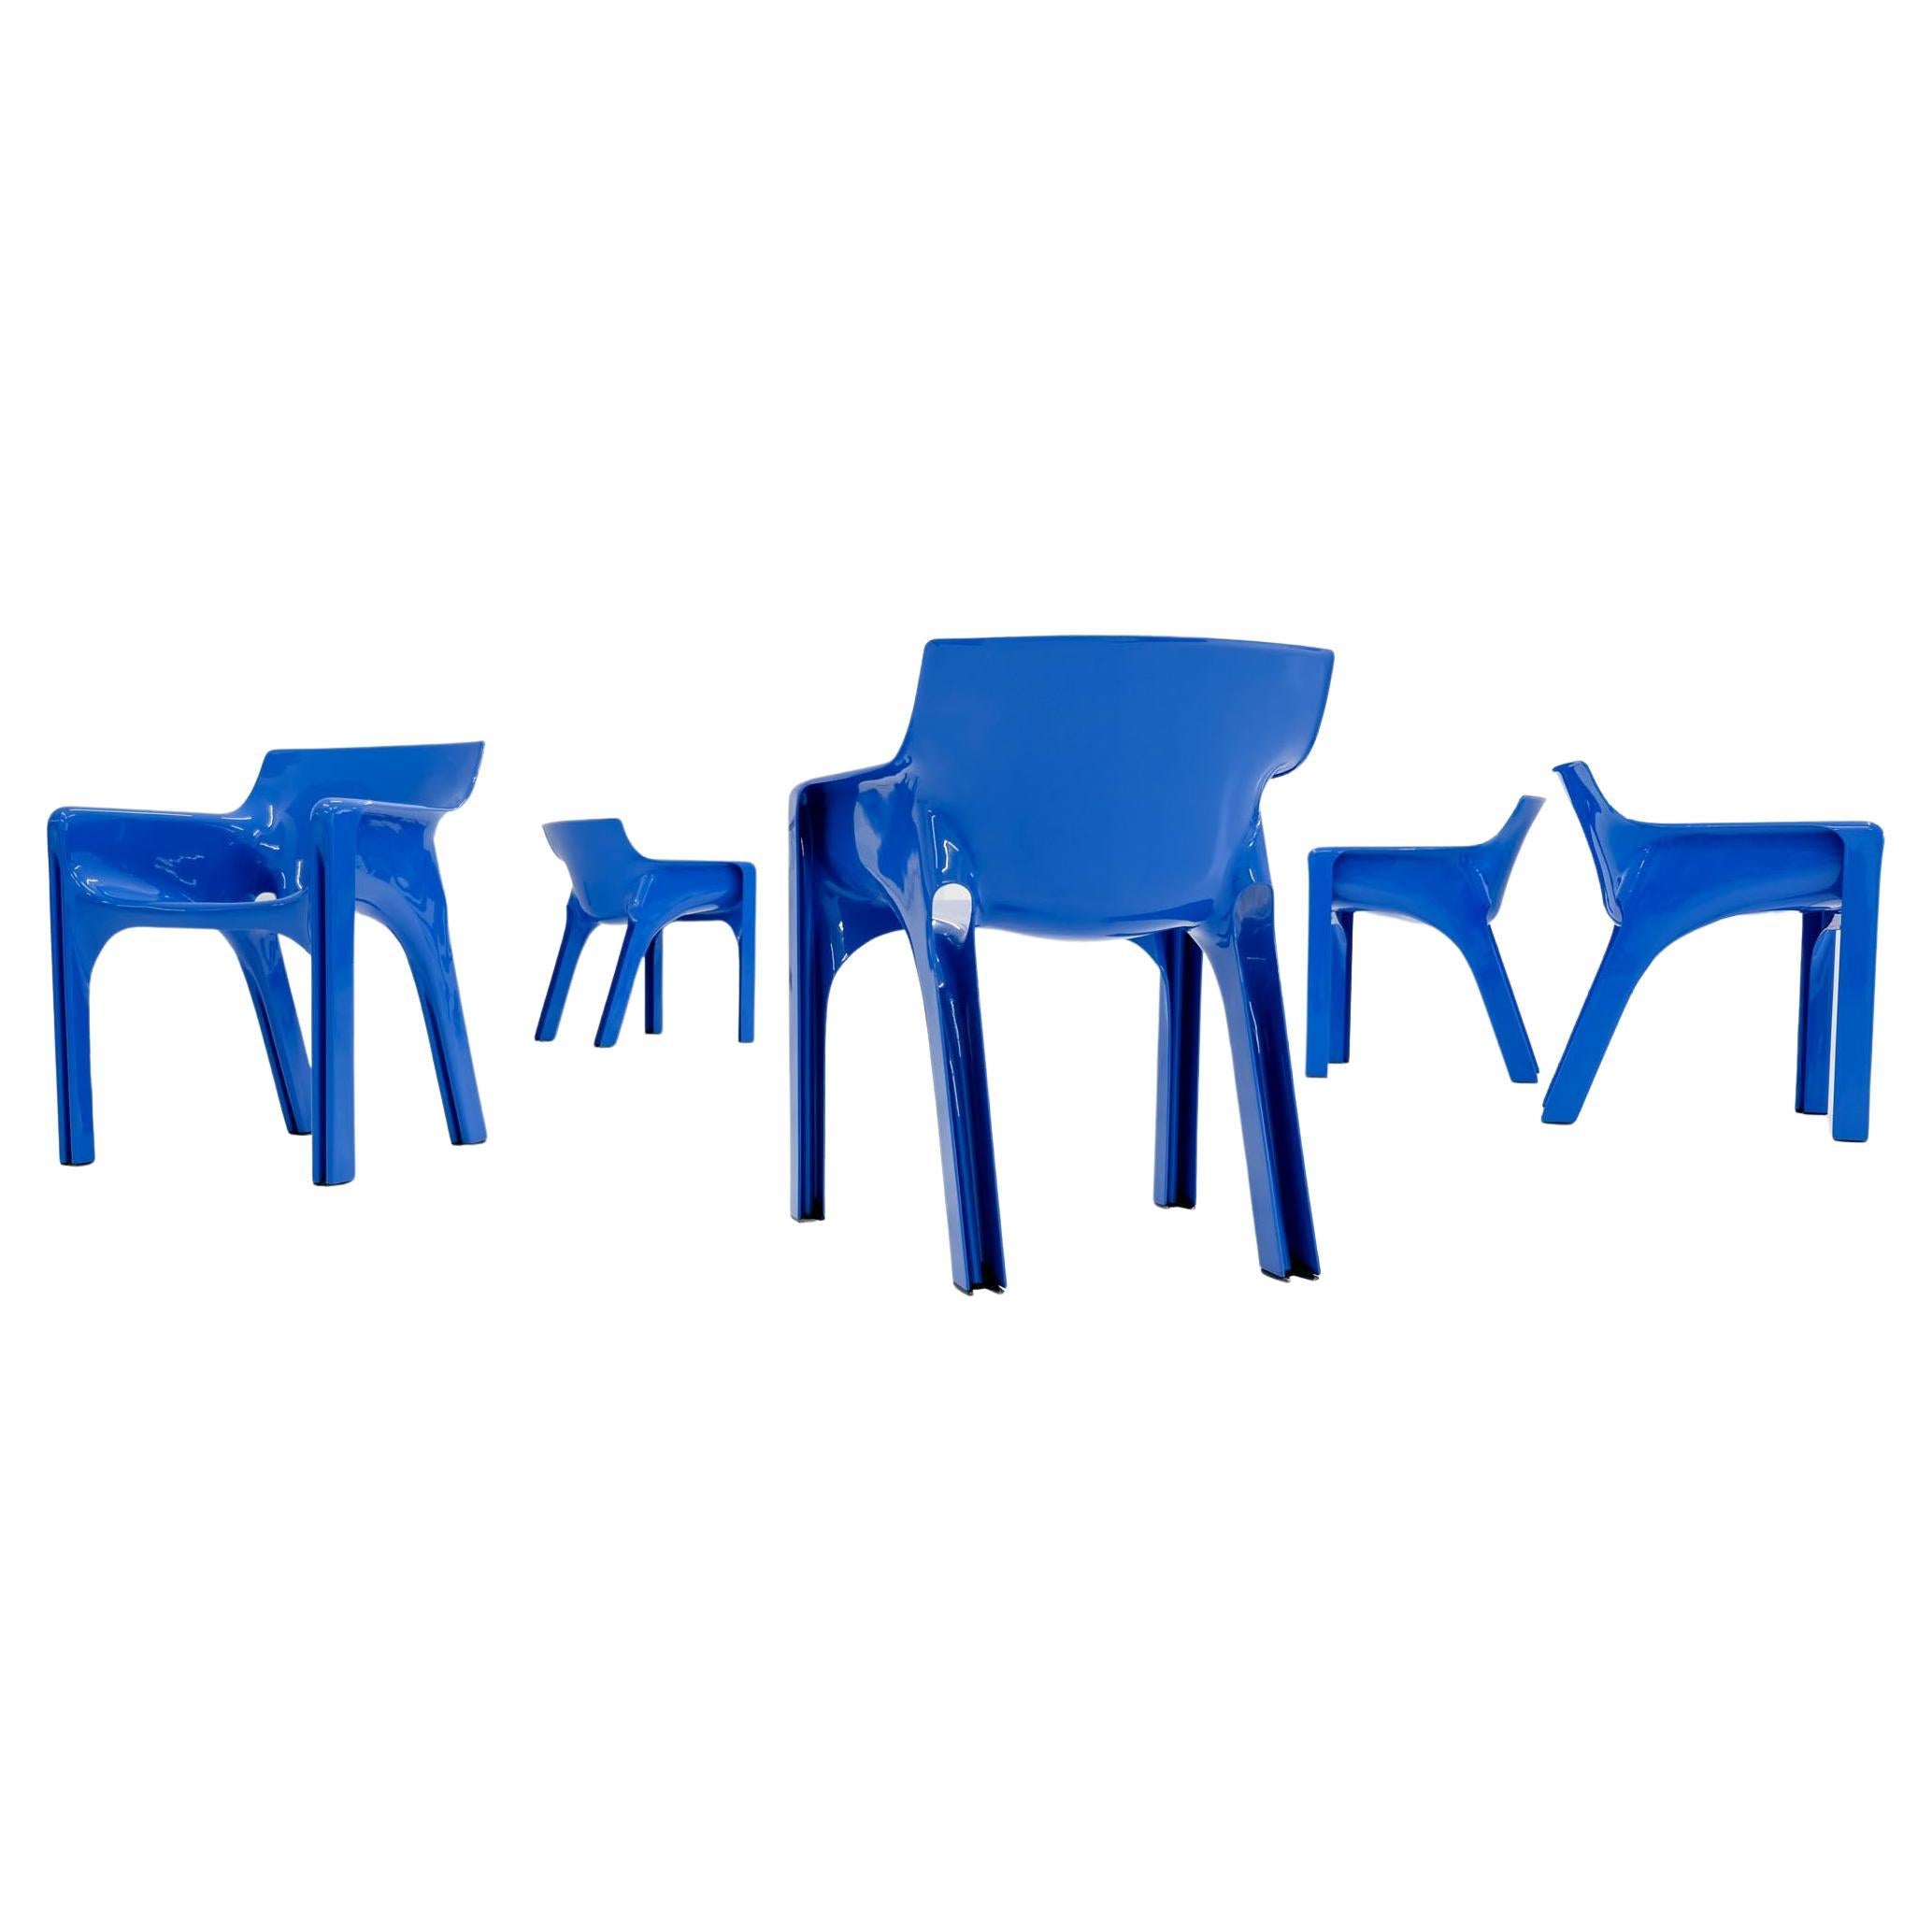 Set of 5 Gaudi Chairs by Vico Magistretti for Artemide, Italy 1970